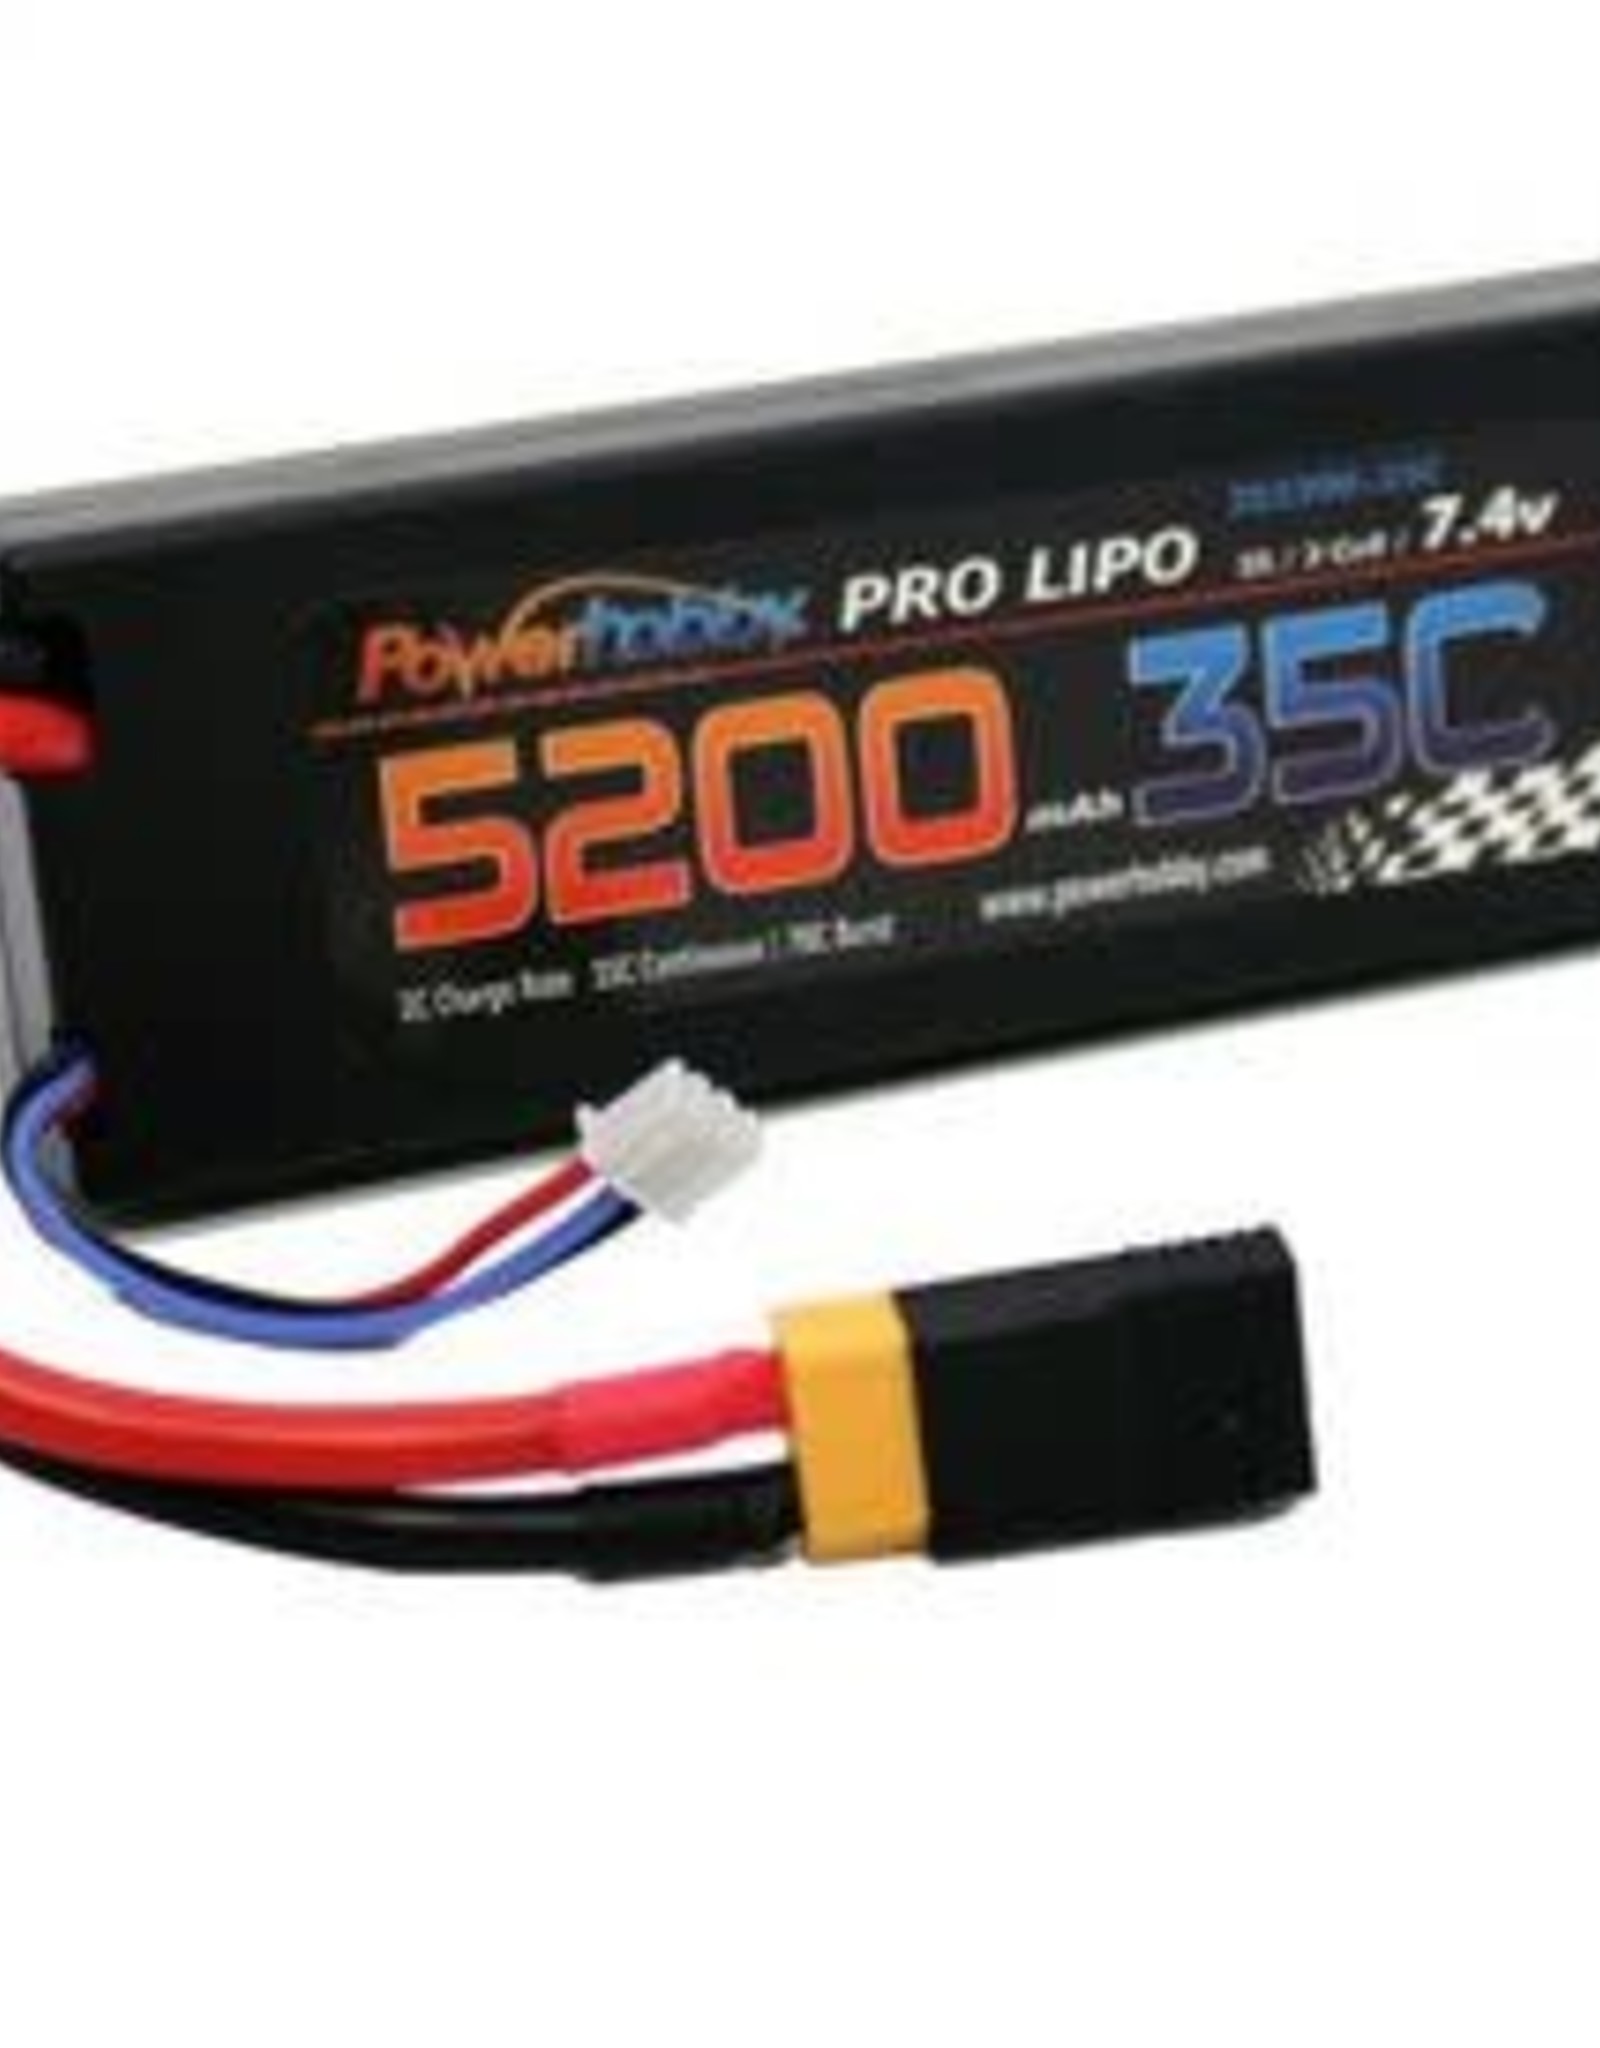 Power Hobby 5200mAh 7.4V 2S 35C LiPo Battery with Hardwired XT60 Connector w/HC Adapter